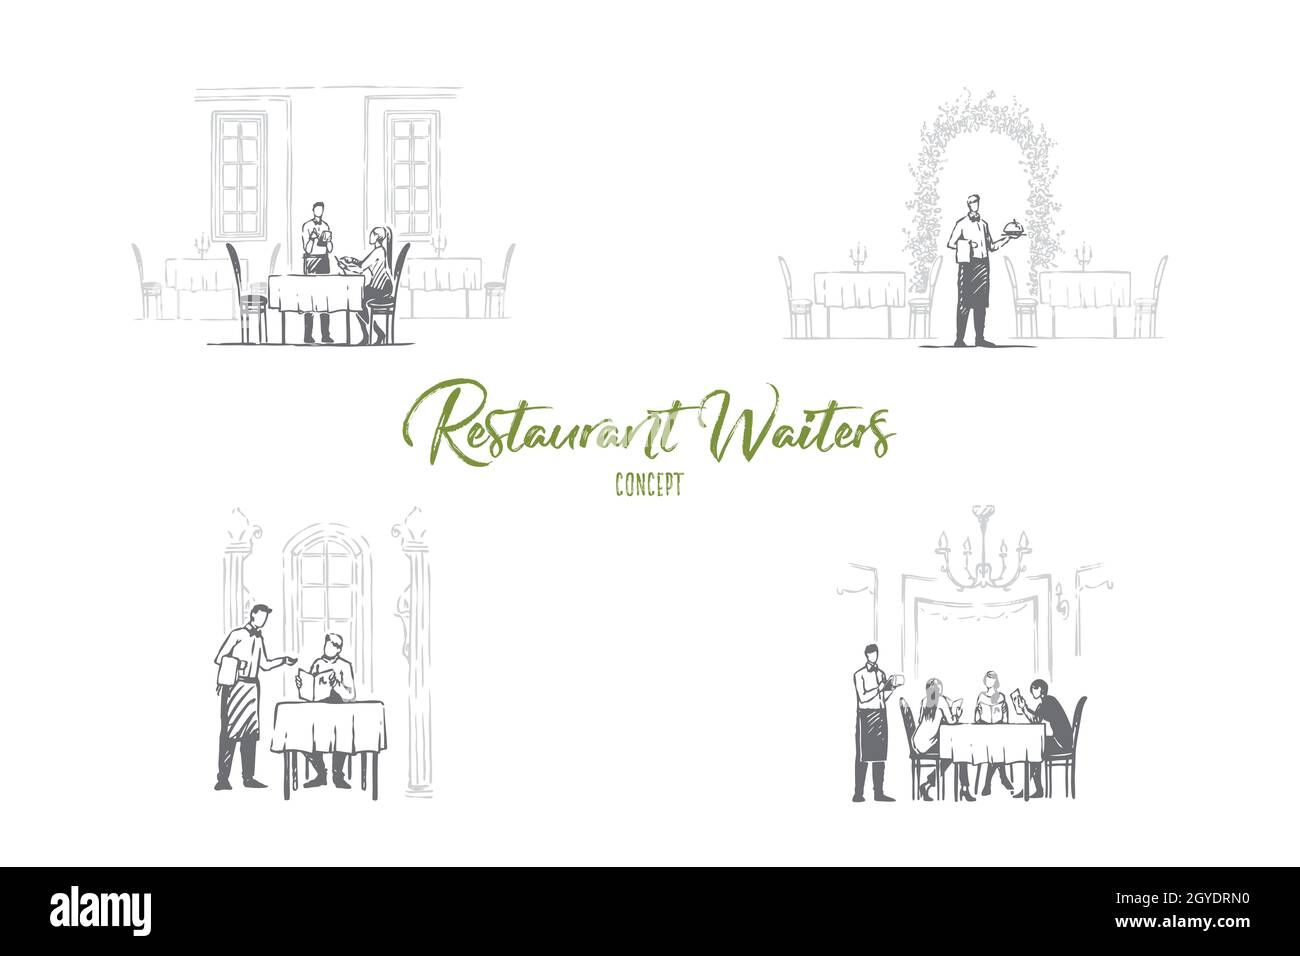 Restaurant waiters - waiters in restaurants getting orders and bringing food vector concept set. Hand drawn sketch isolated illustration Stock Photo